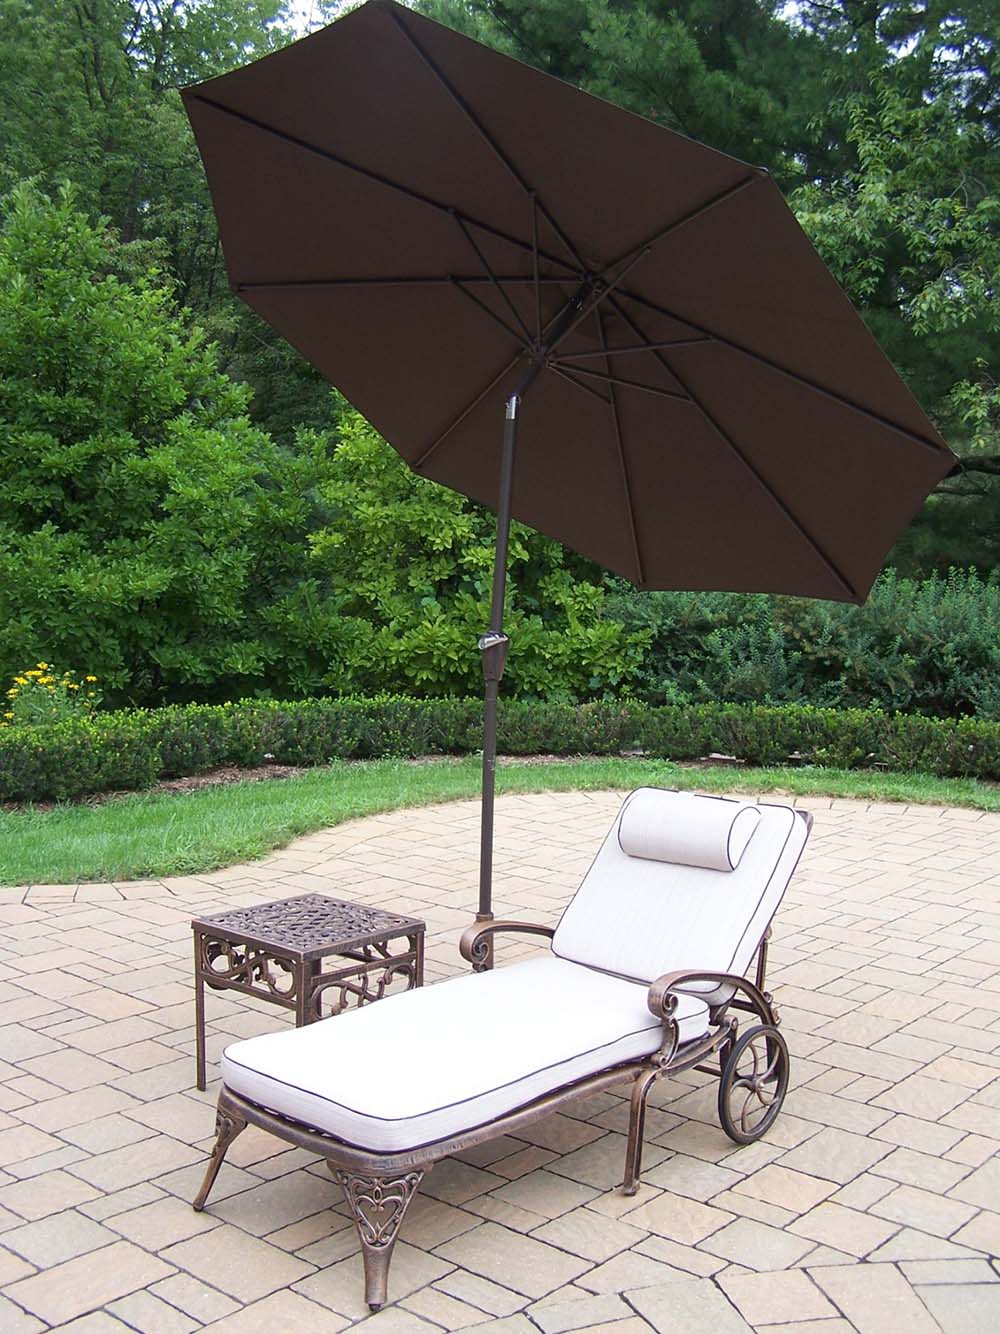 Elite 1 Cushioned Chaise Lounge: Table, Brown Umbrella